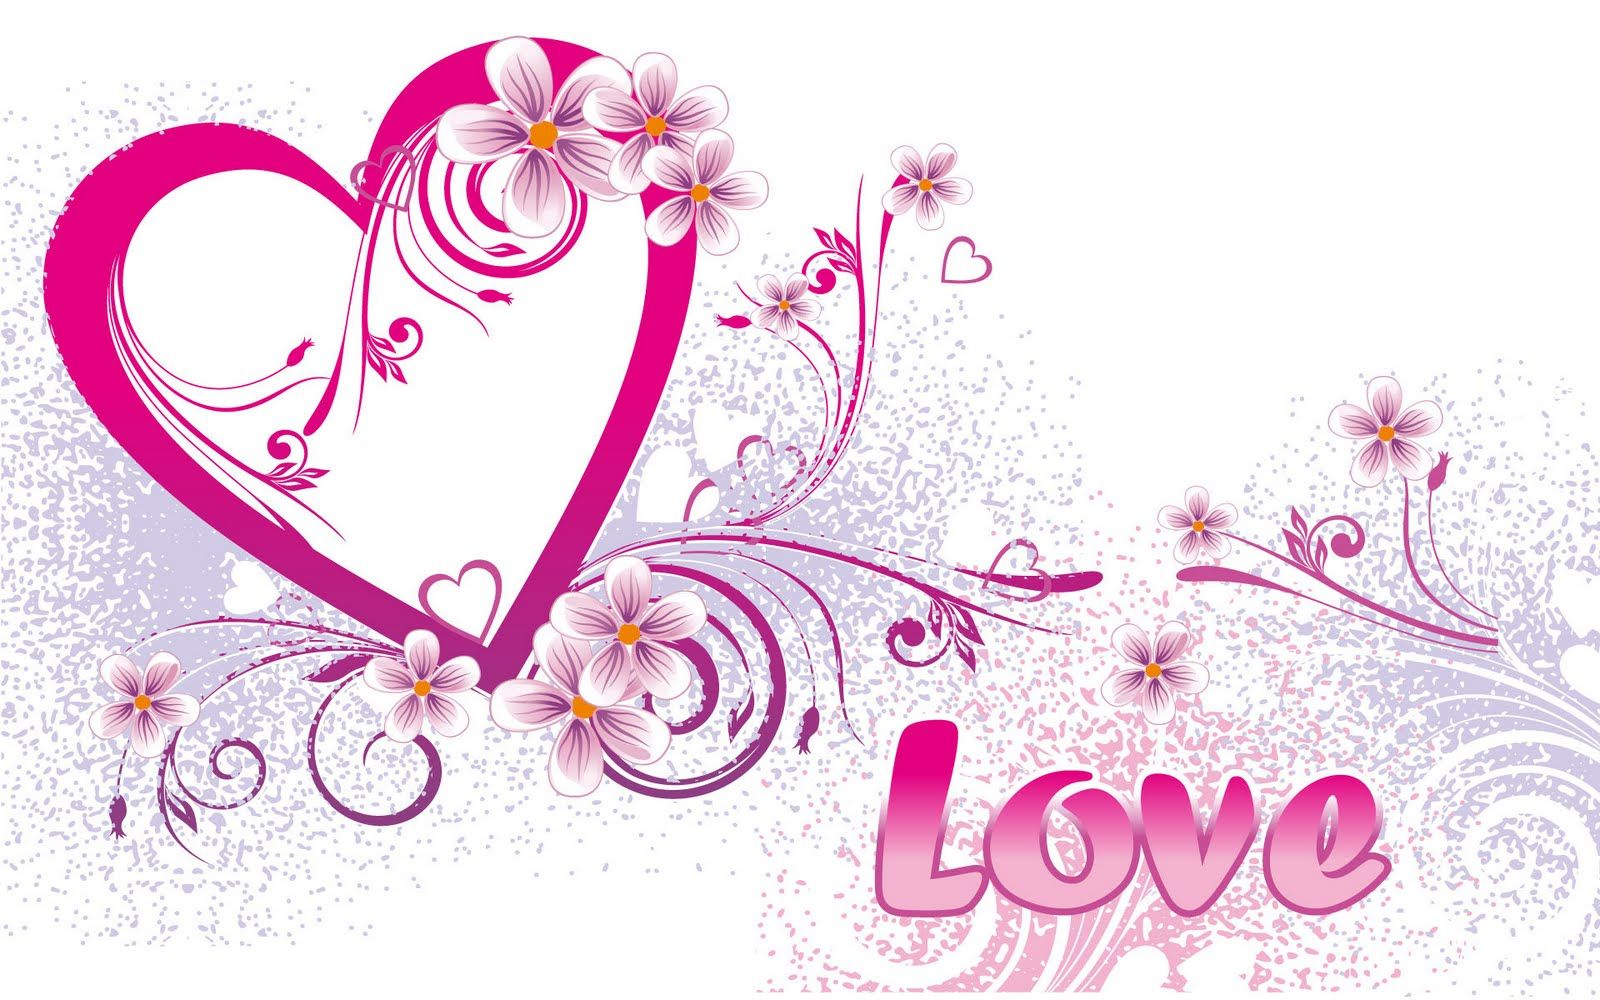 Love Images Wallpaper Download - Wallpapers High Definition